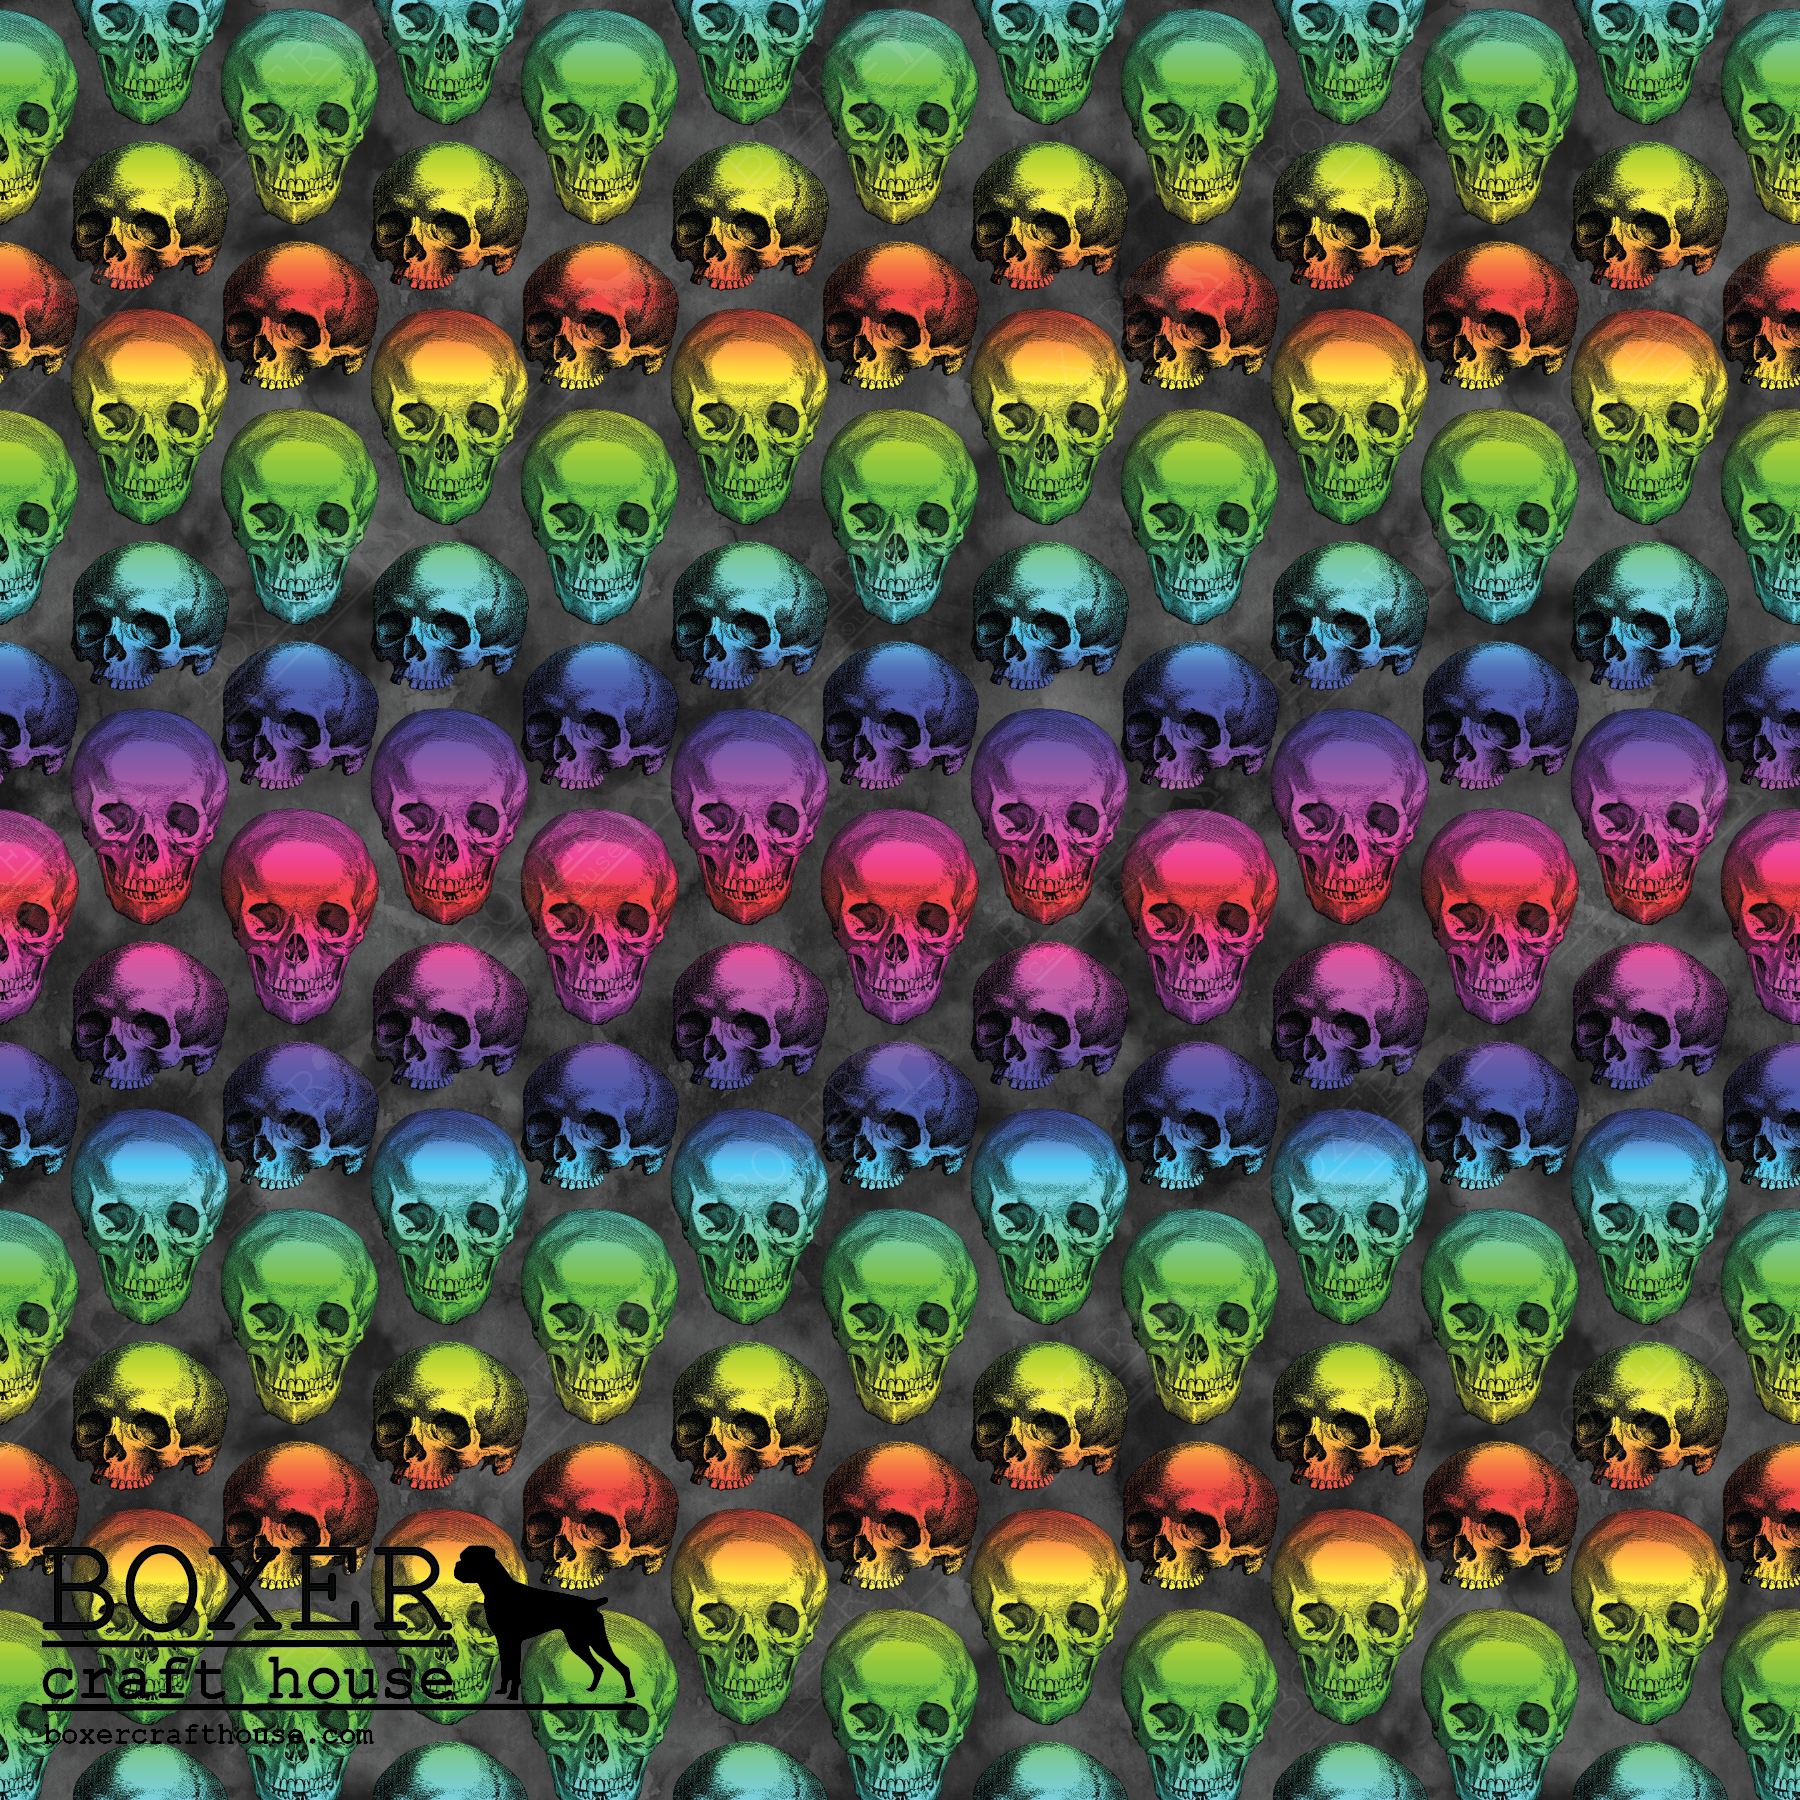 Colorful Skulls Faux Leather, Embroidery Vinyl, Sewing Faux Leather, Rainbow Skulls, Bag Making Supplies, Faux Leather For Embroidery, Quality Faux Leather, Embroidery Supplies, Sewing Supplies, Woman Owned Business, Craft Supply Store, USA,